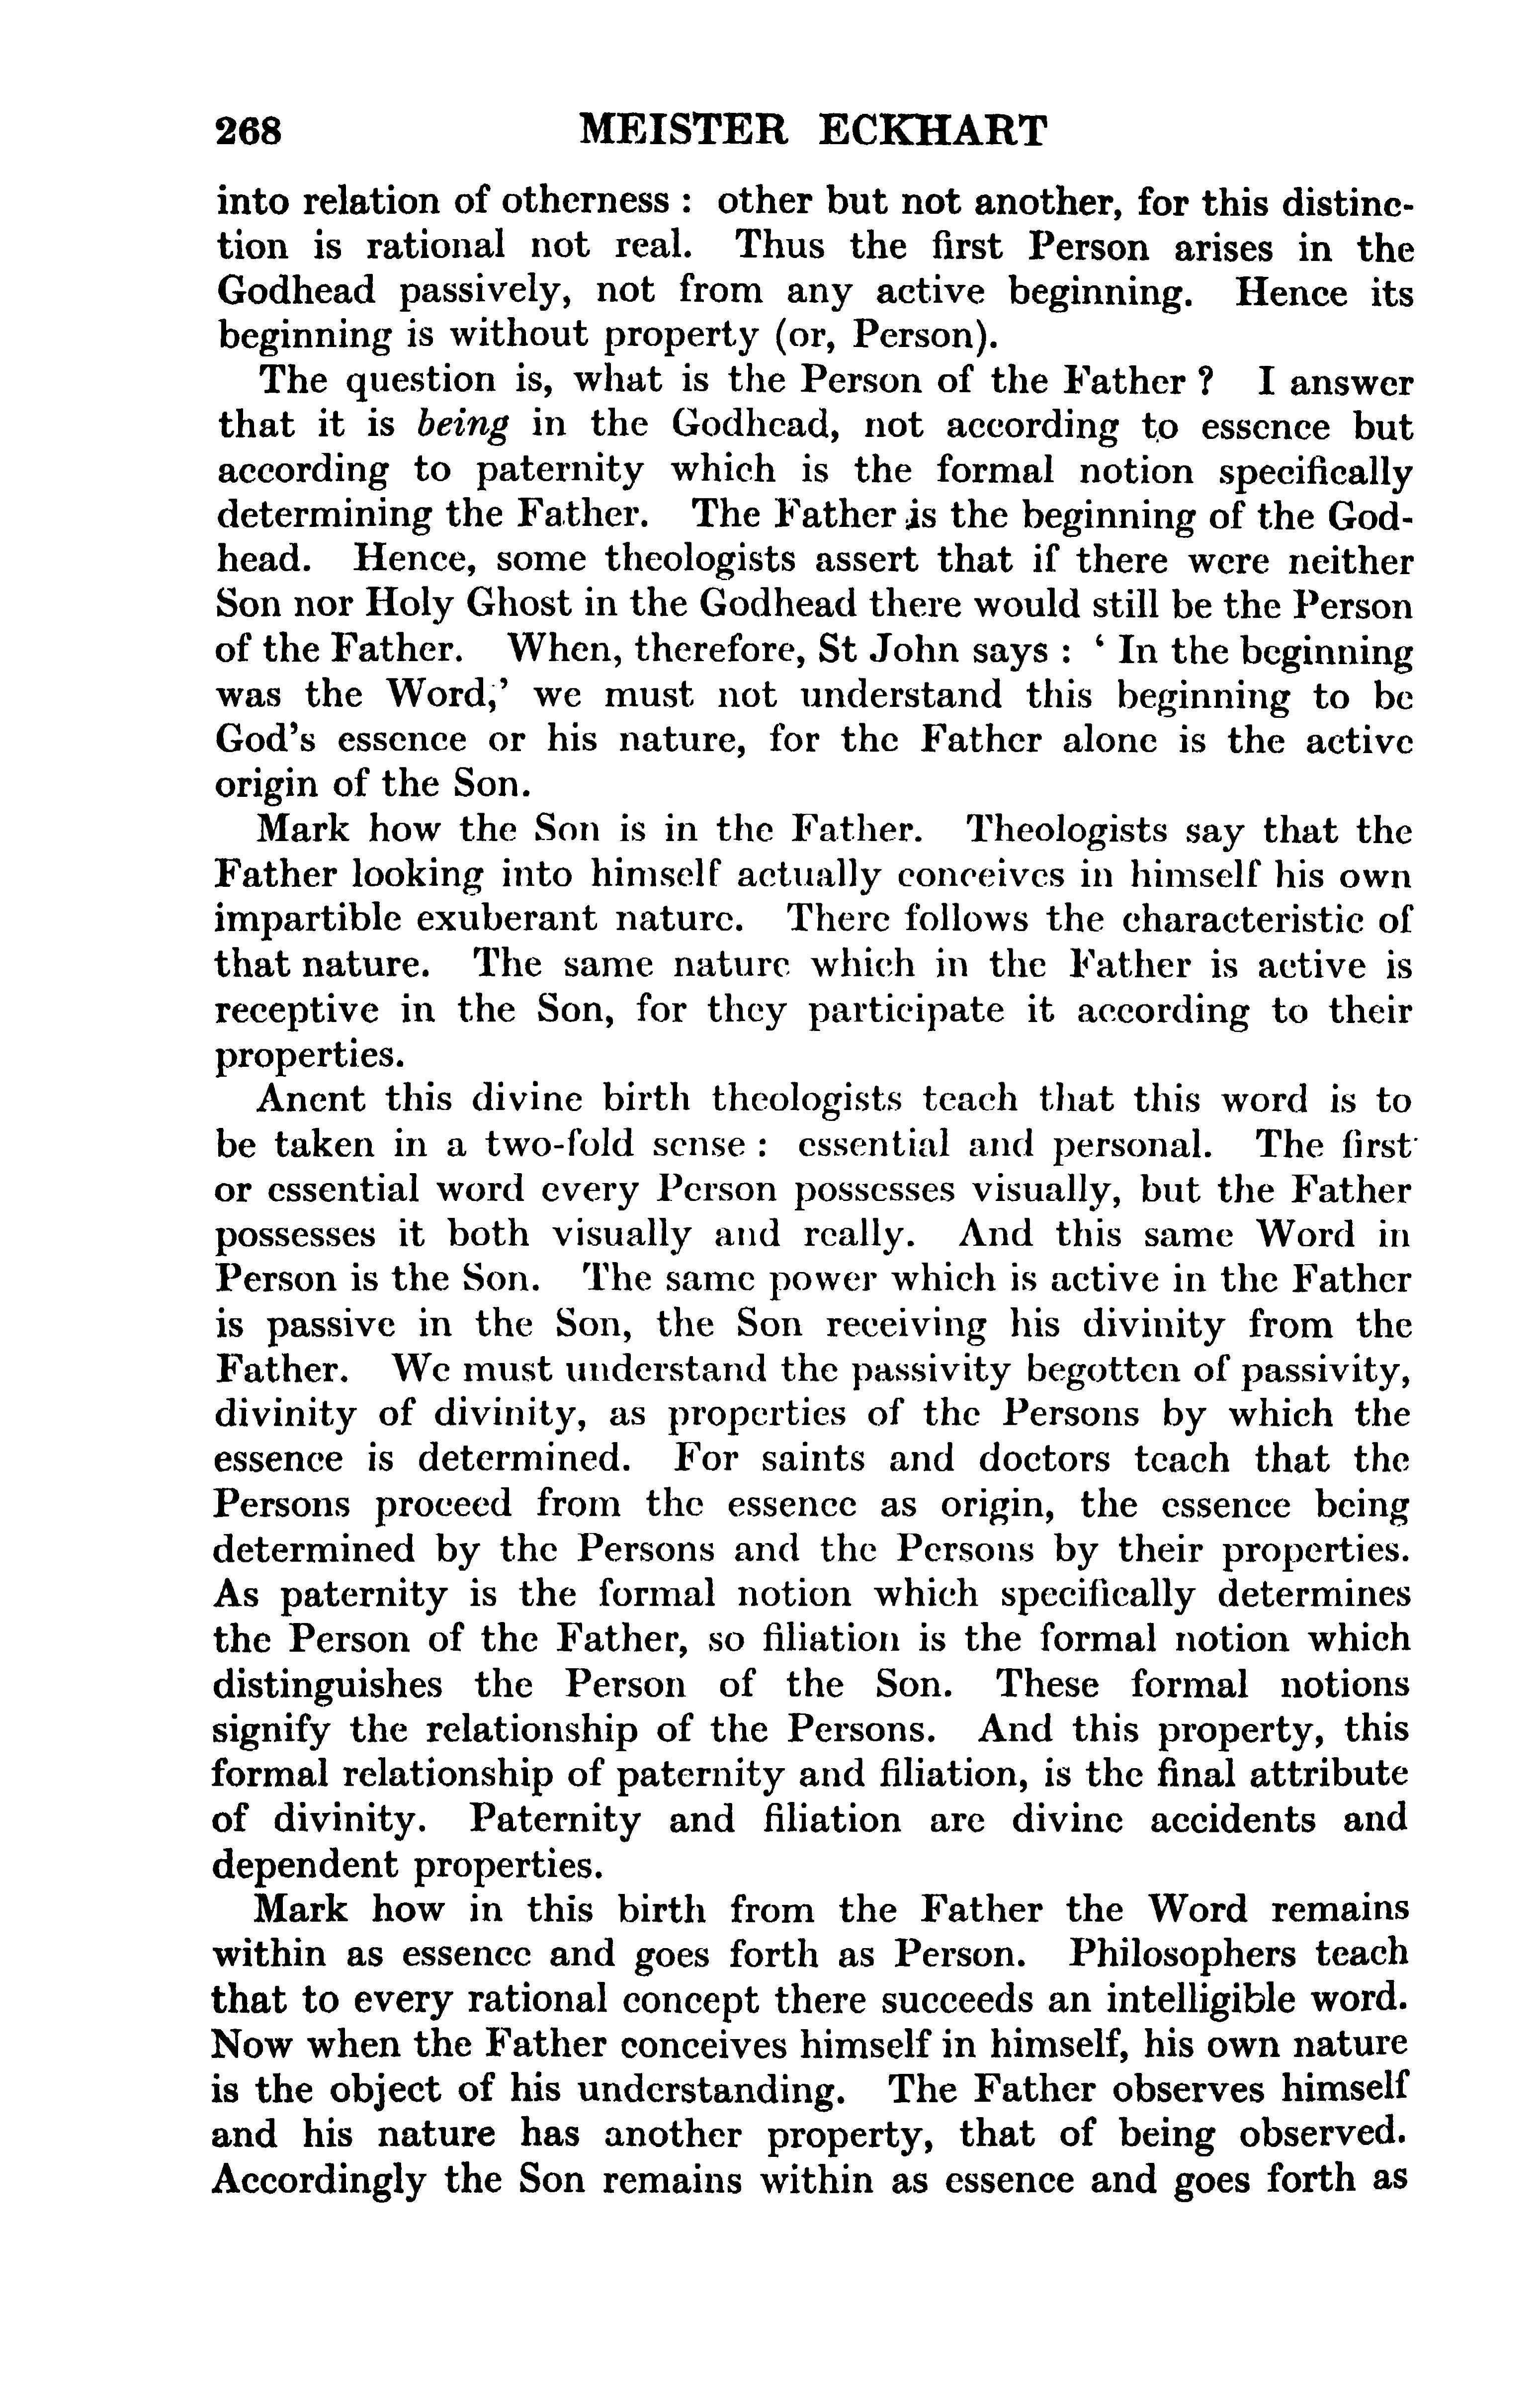 Image of page 0292